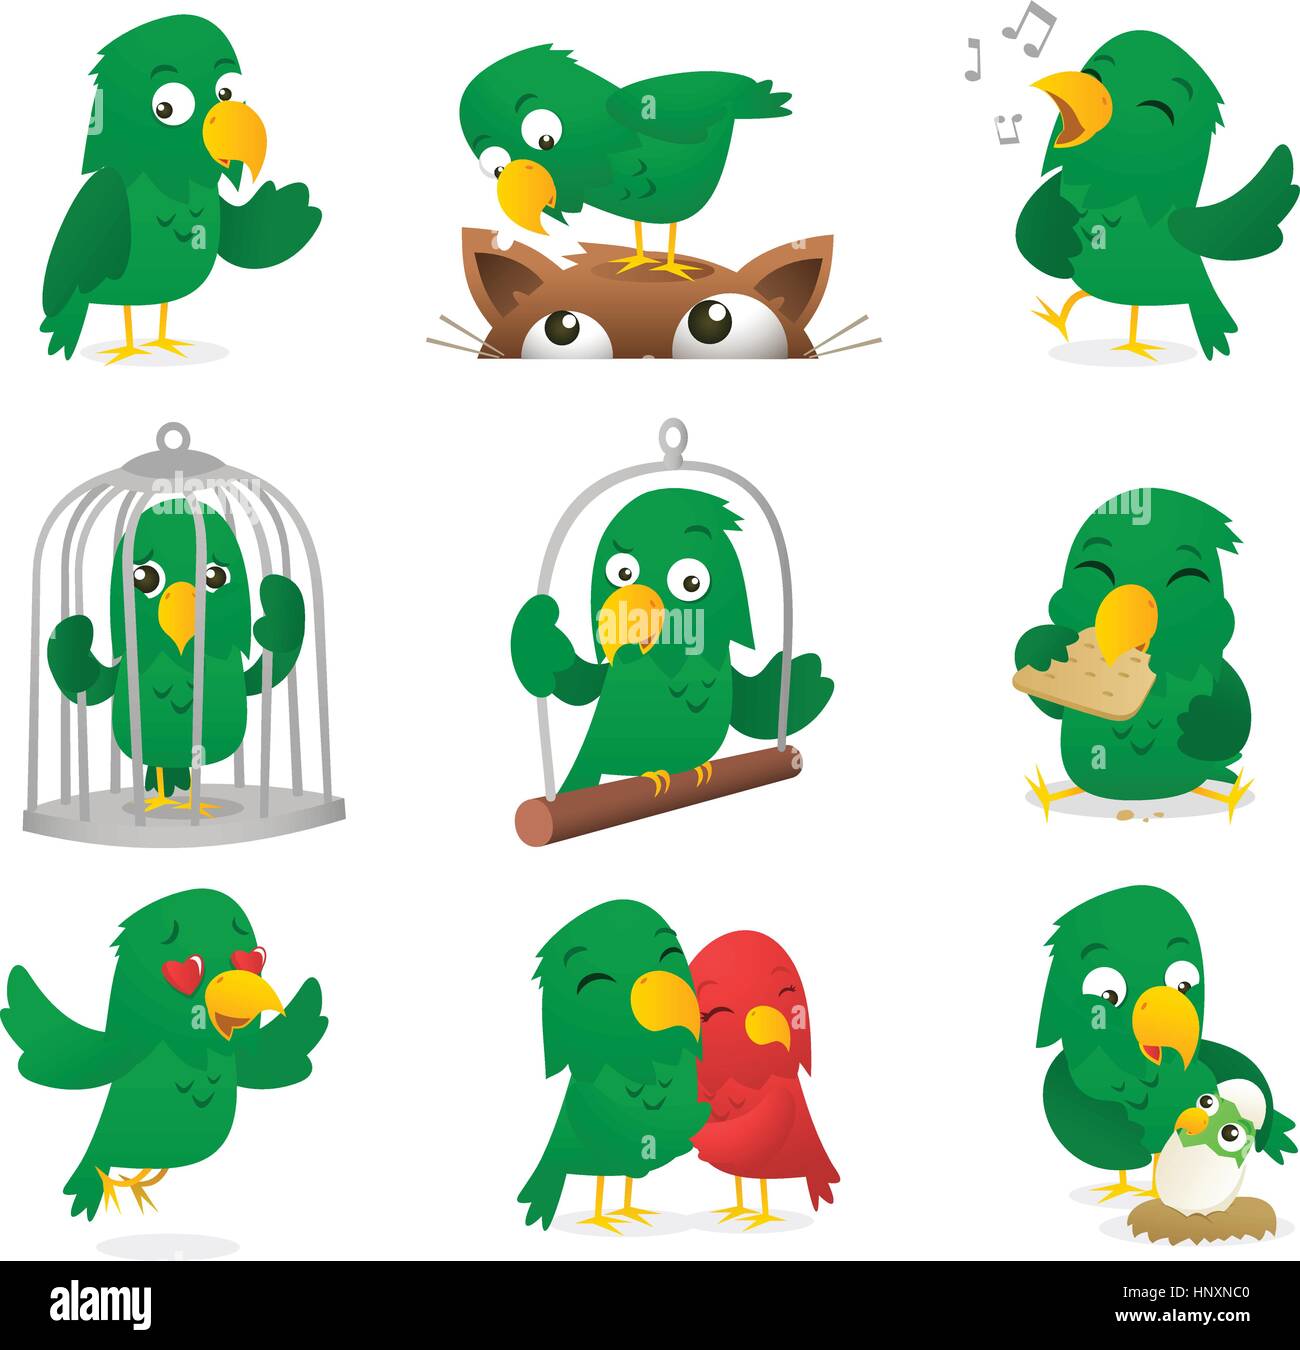 Cartoon parrot collection. Parrot, parakeet, love-bird, cockatoo, polly, imitate caricature, in different scenes like, standing parrot, standing on ca Stock Vector